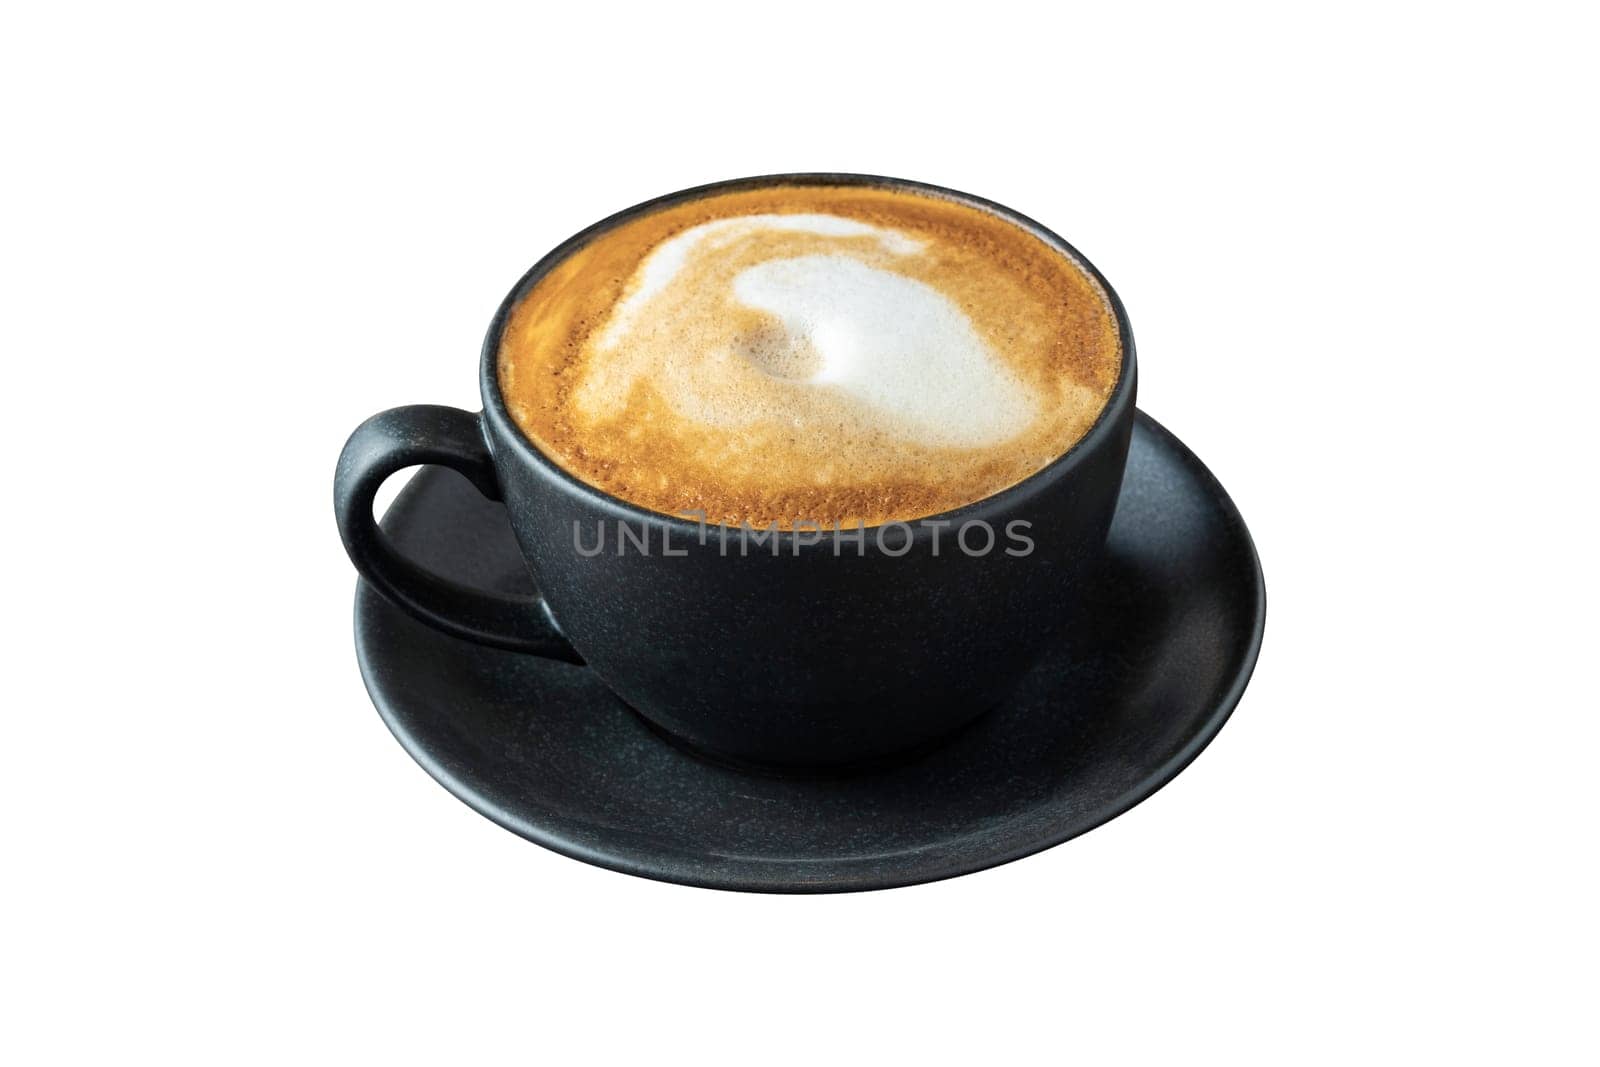 Relaxing latte coffee in black porcelain cup on white background